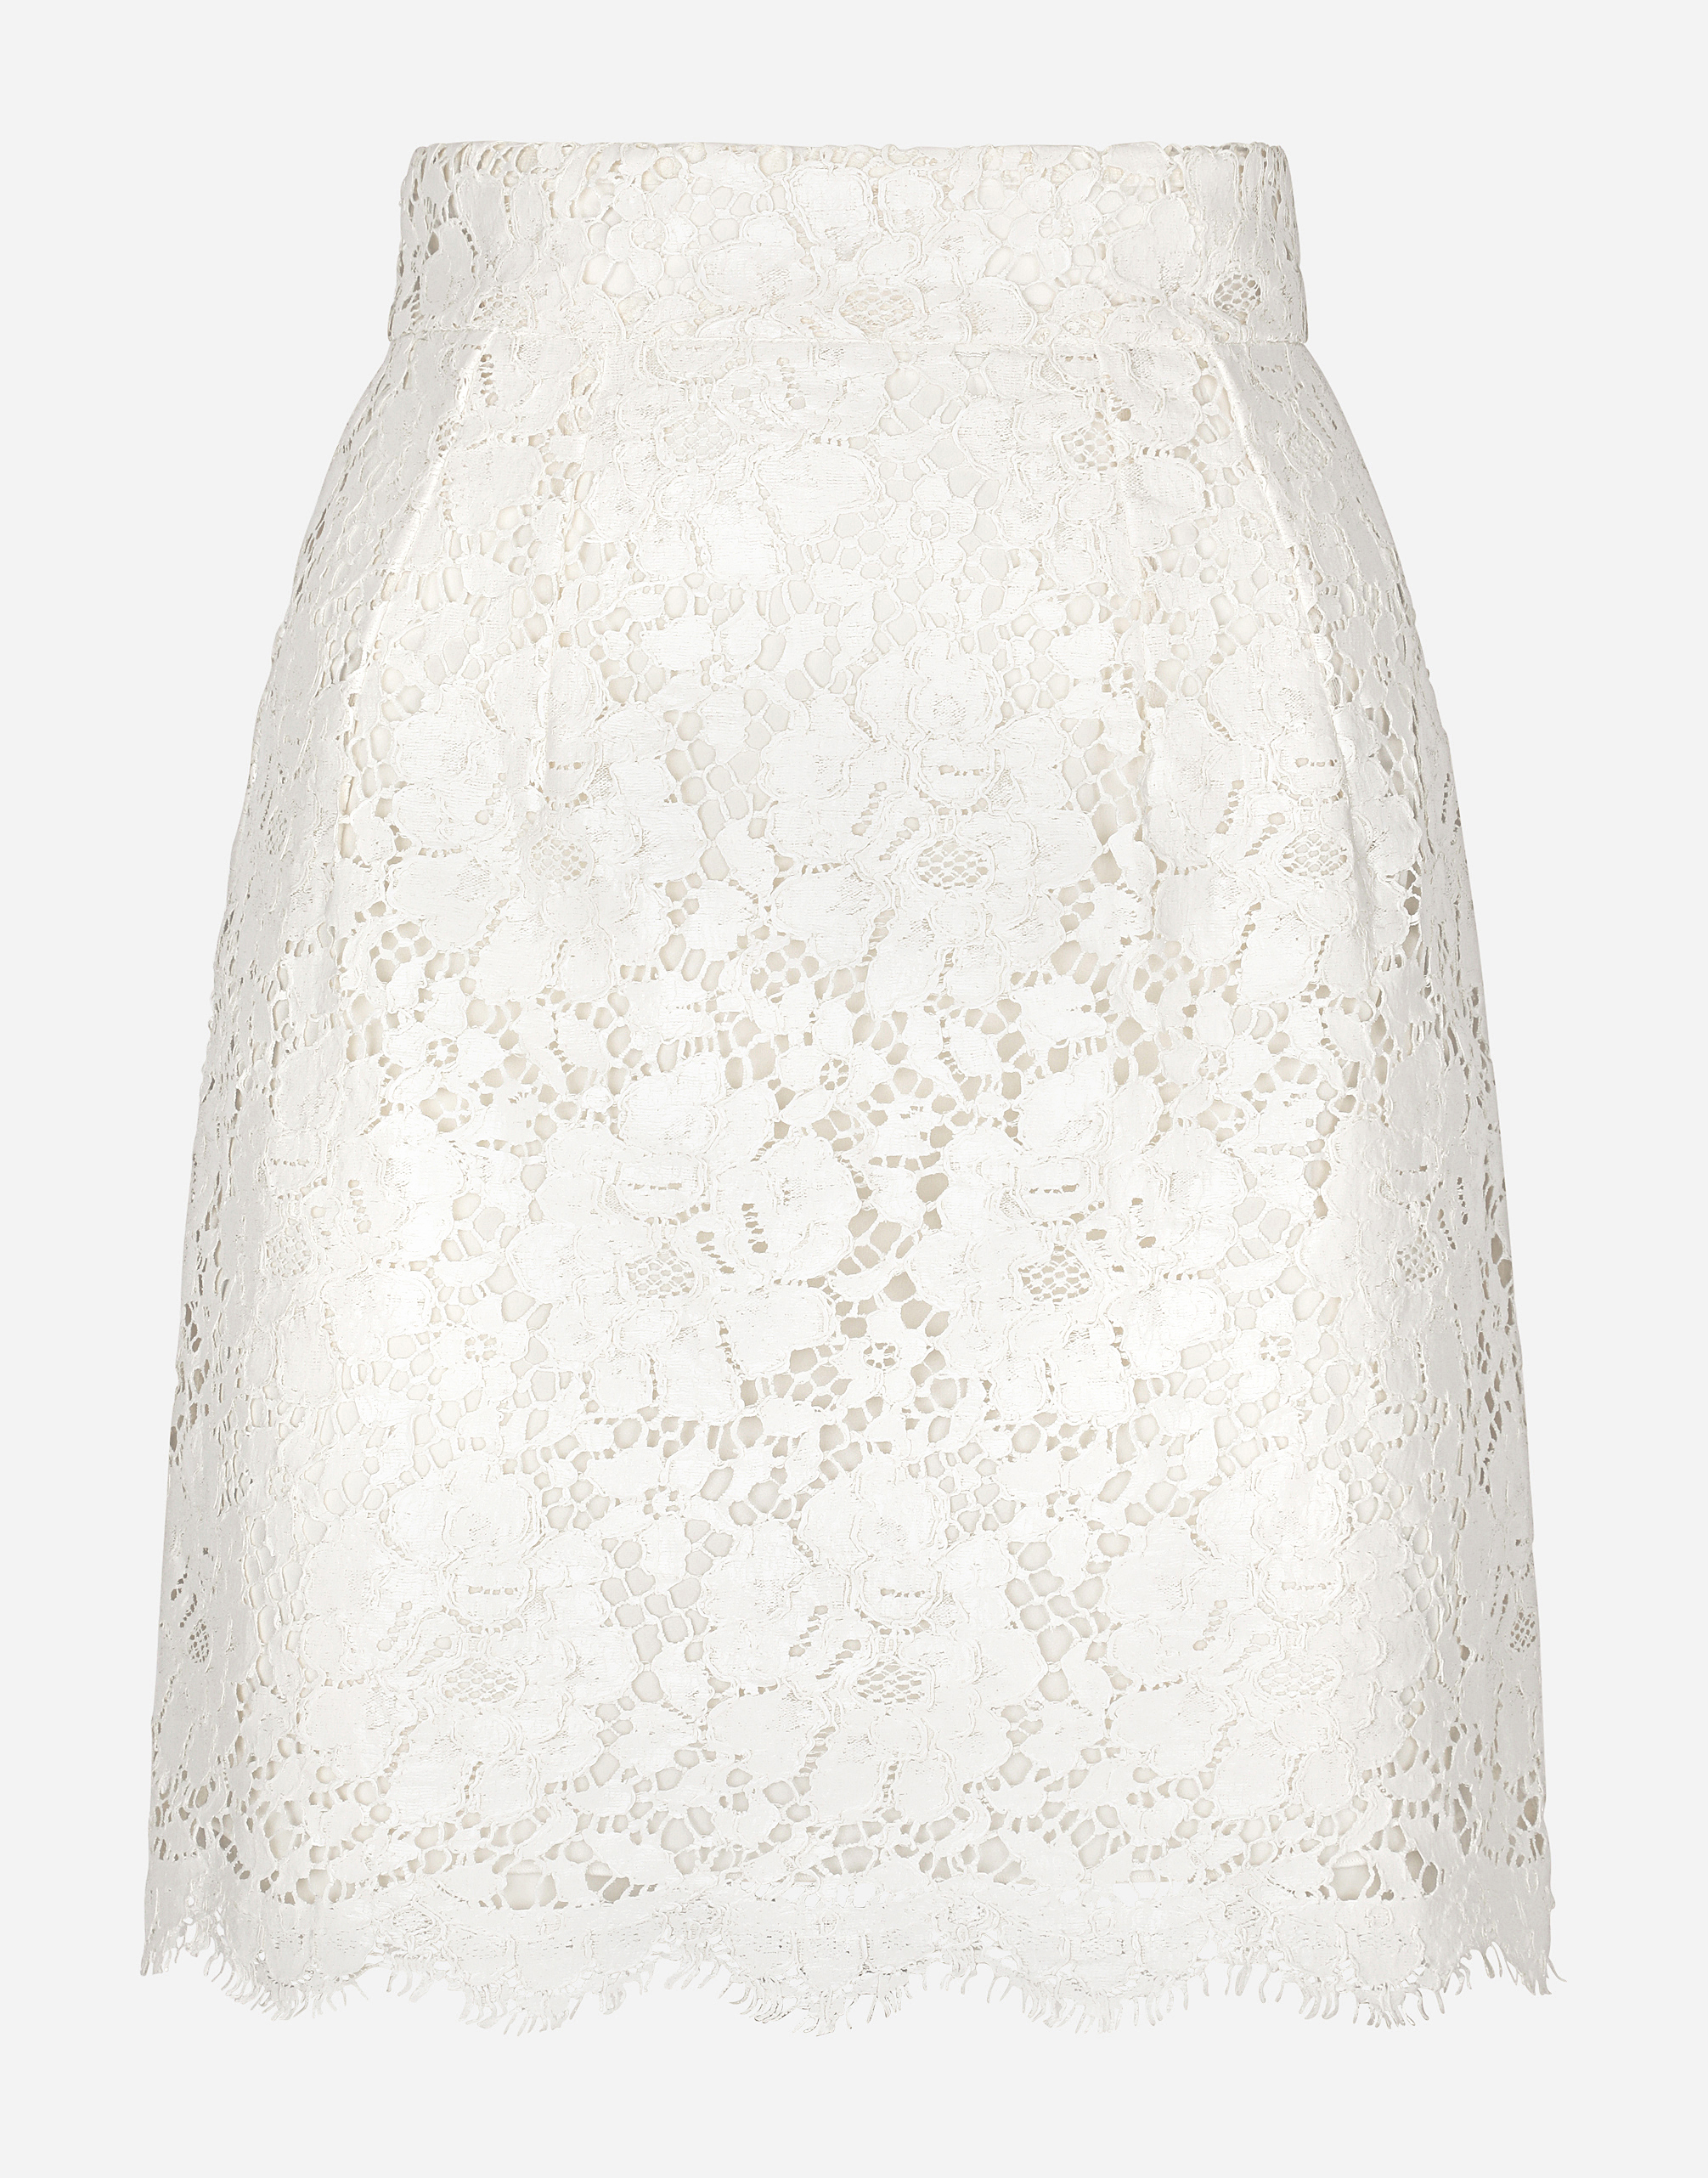 Laminated lace miniskirt in White